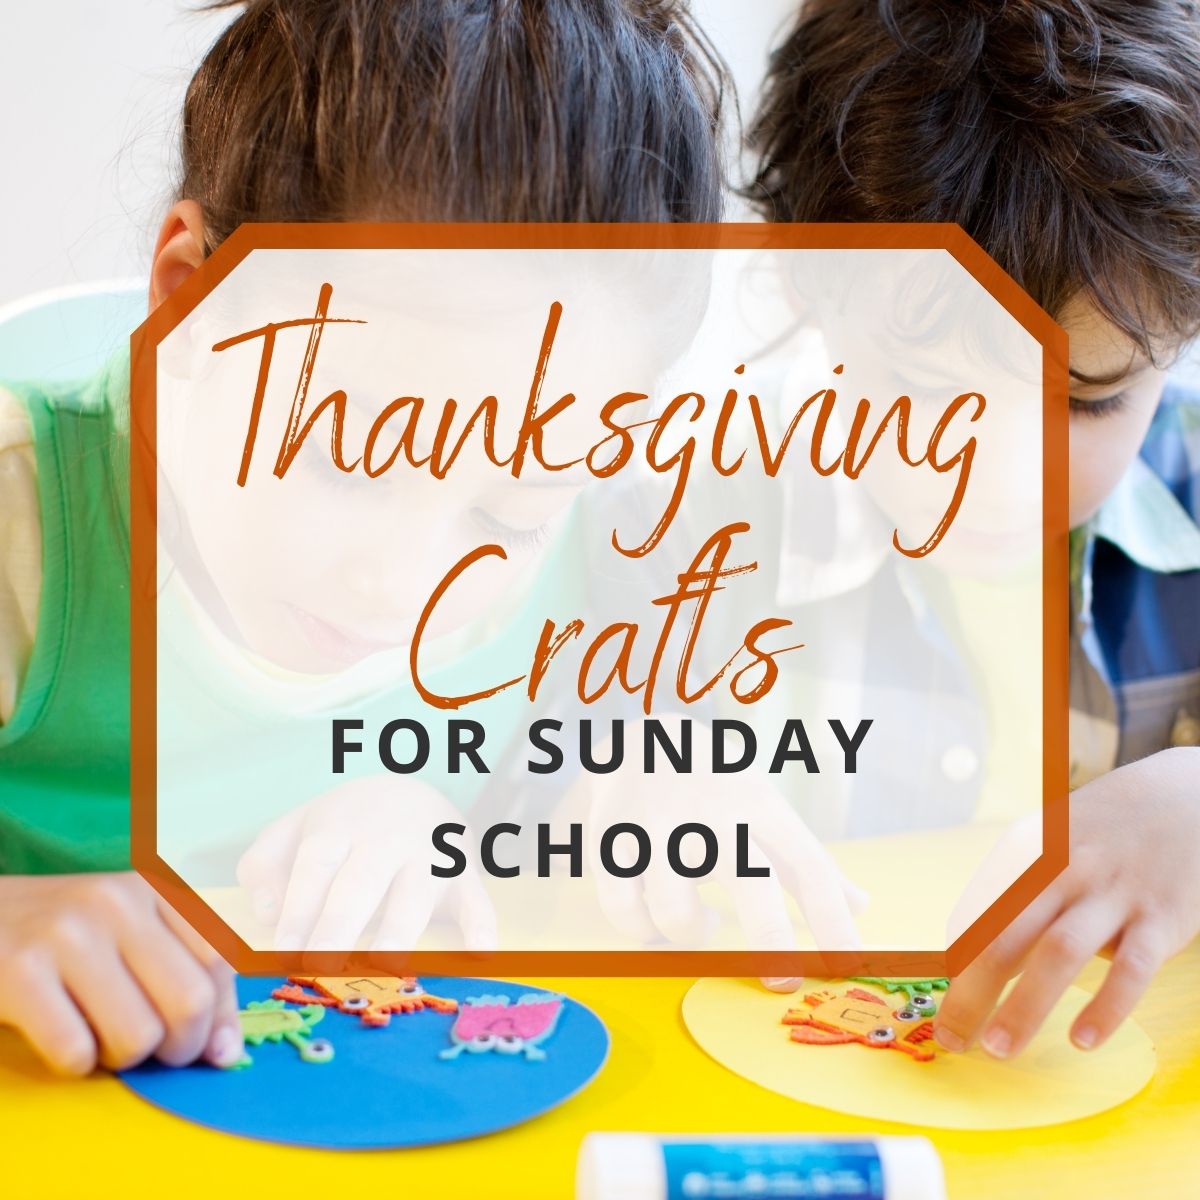 kids doing thanksgiving crafts for sunday school